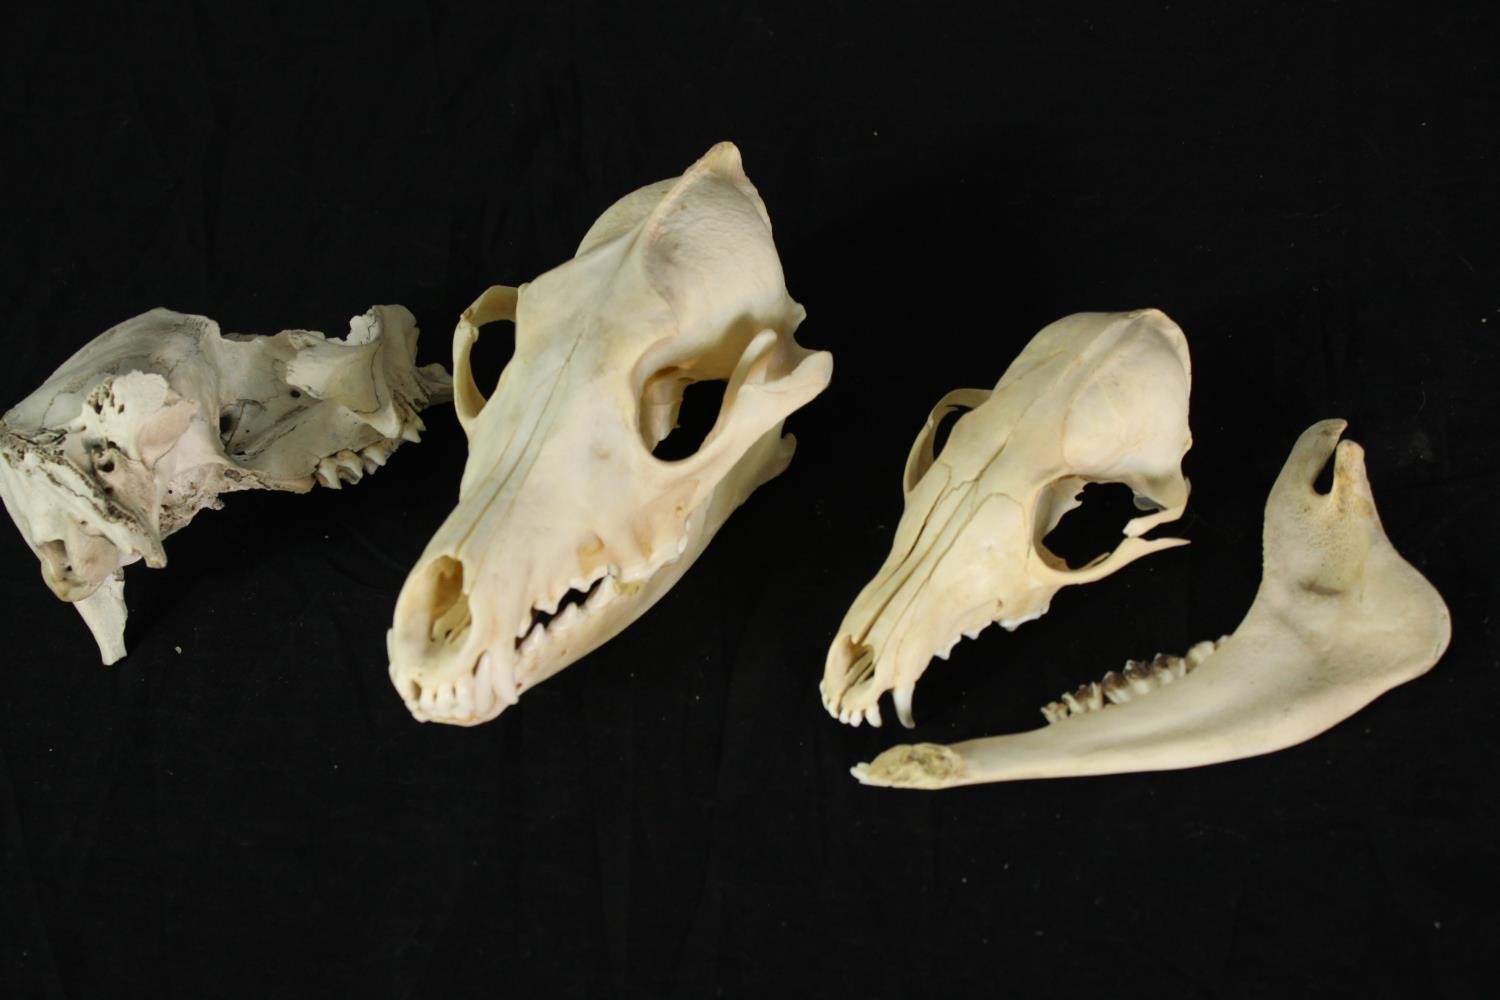 Two skulls and one jaw bone from unknown animals. H.8 x W.21 cm.